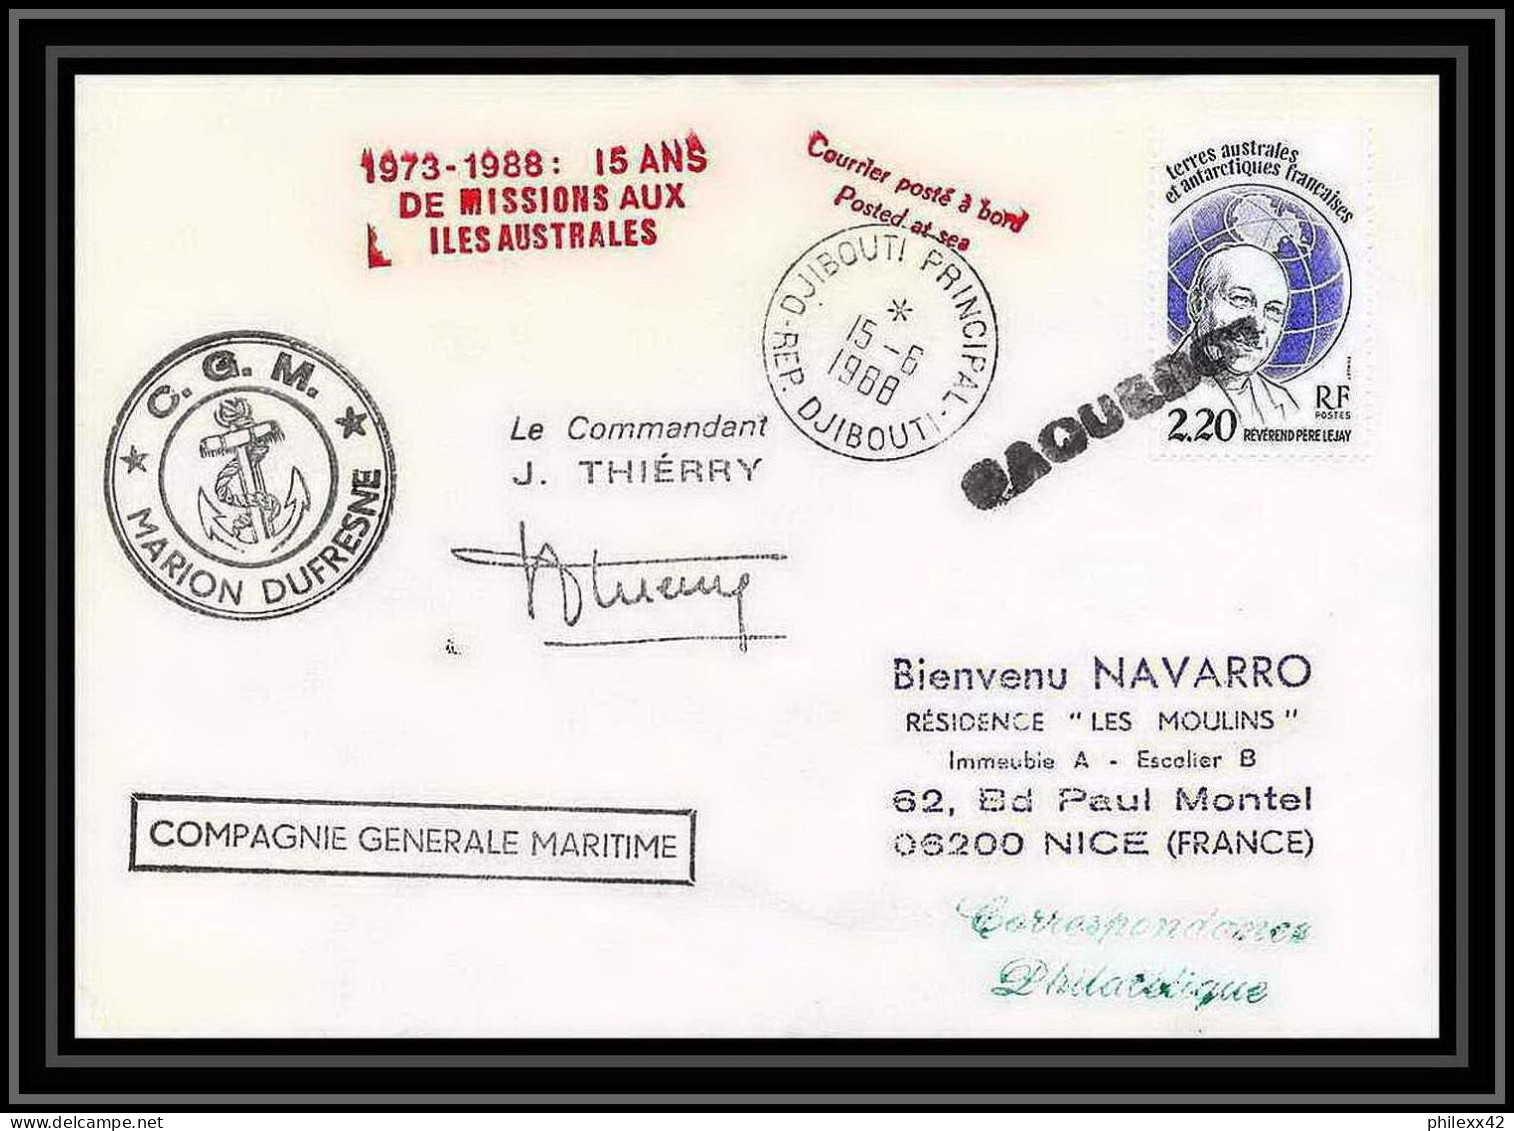 1564 15 Ans De Missions Signé Signed Thierry 16/6/1988 Marion Dufresne TAAF Antarctic Terres Australes Lettre (cover) - Antarctische Expedities